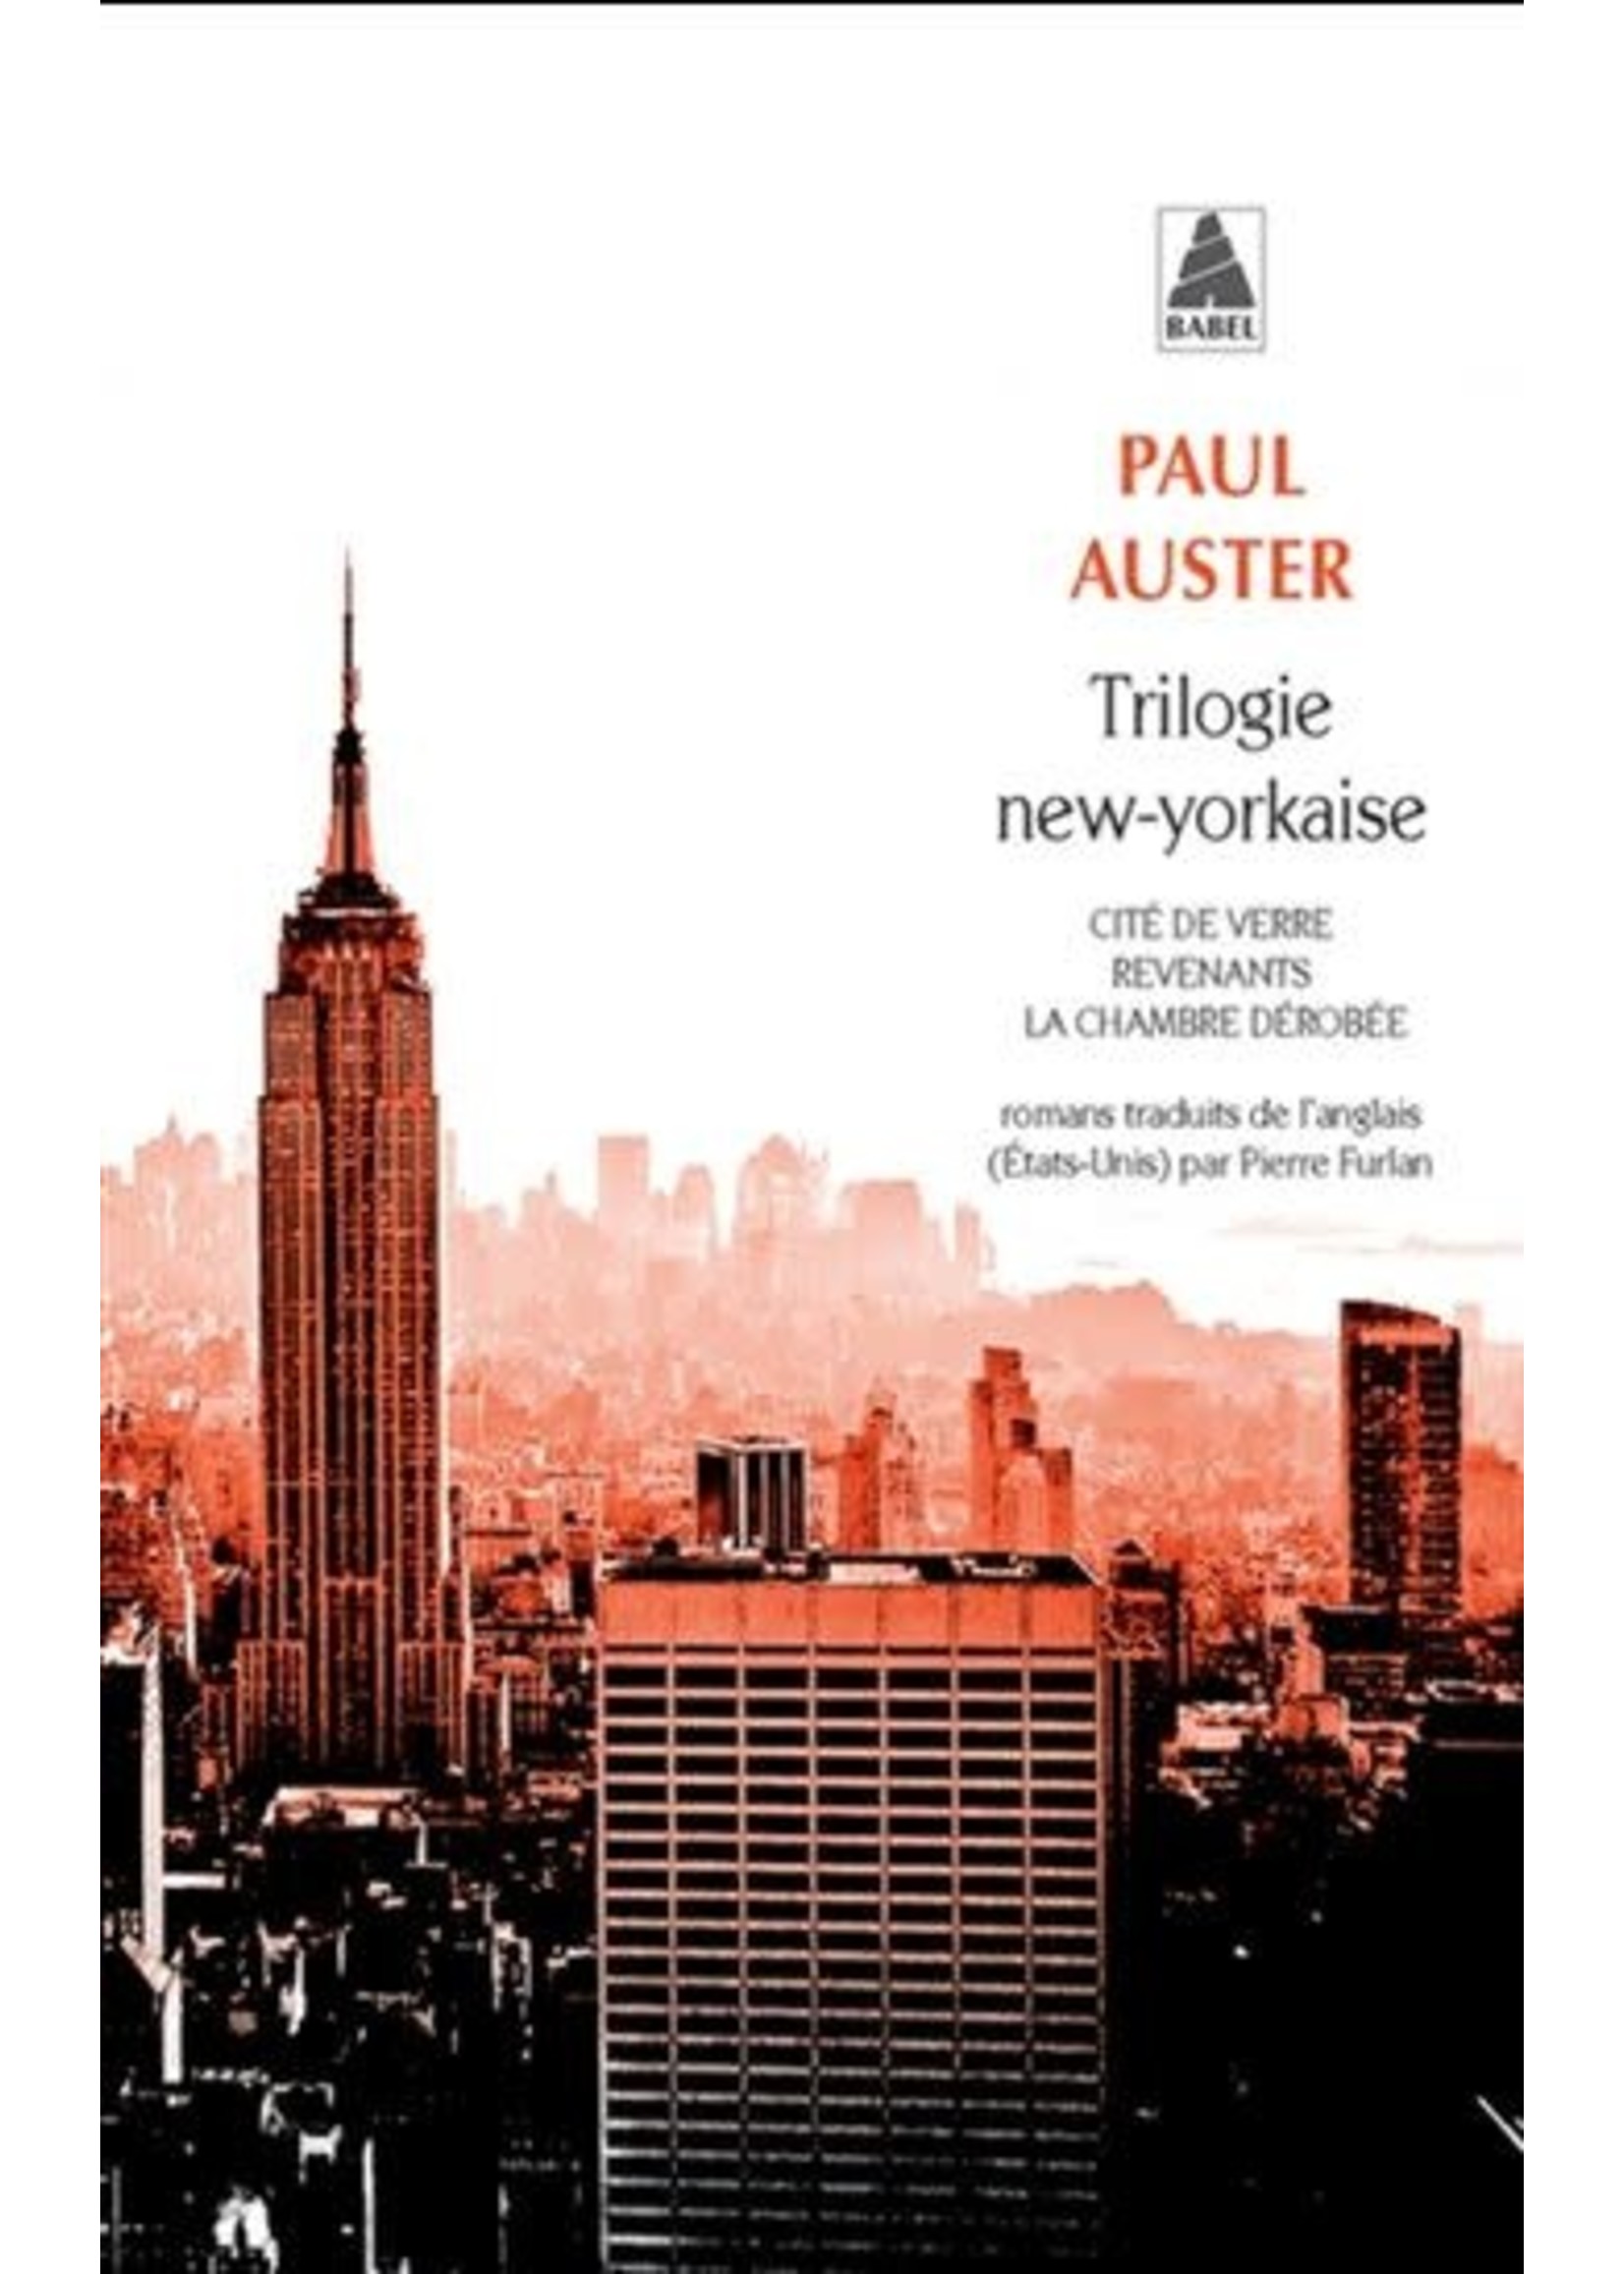 Trilogie new-yorkaise by Paul Auster